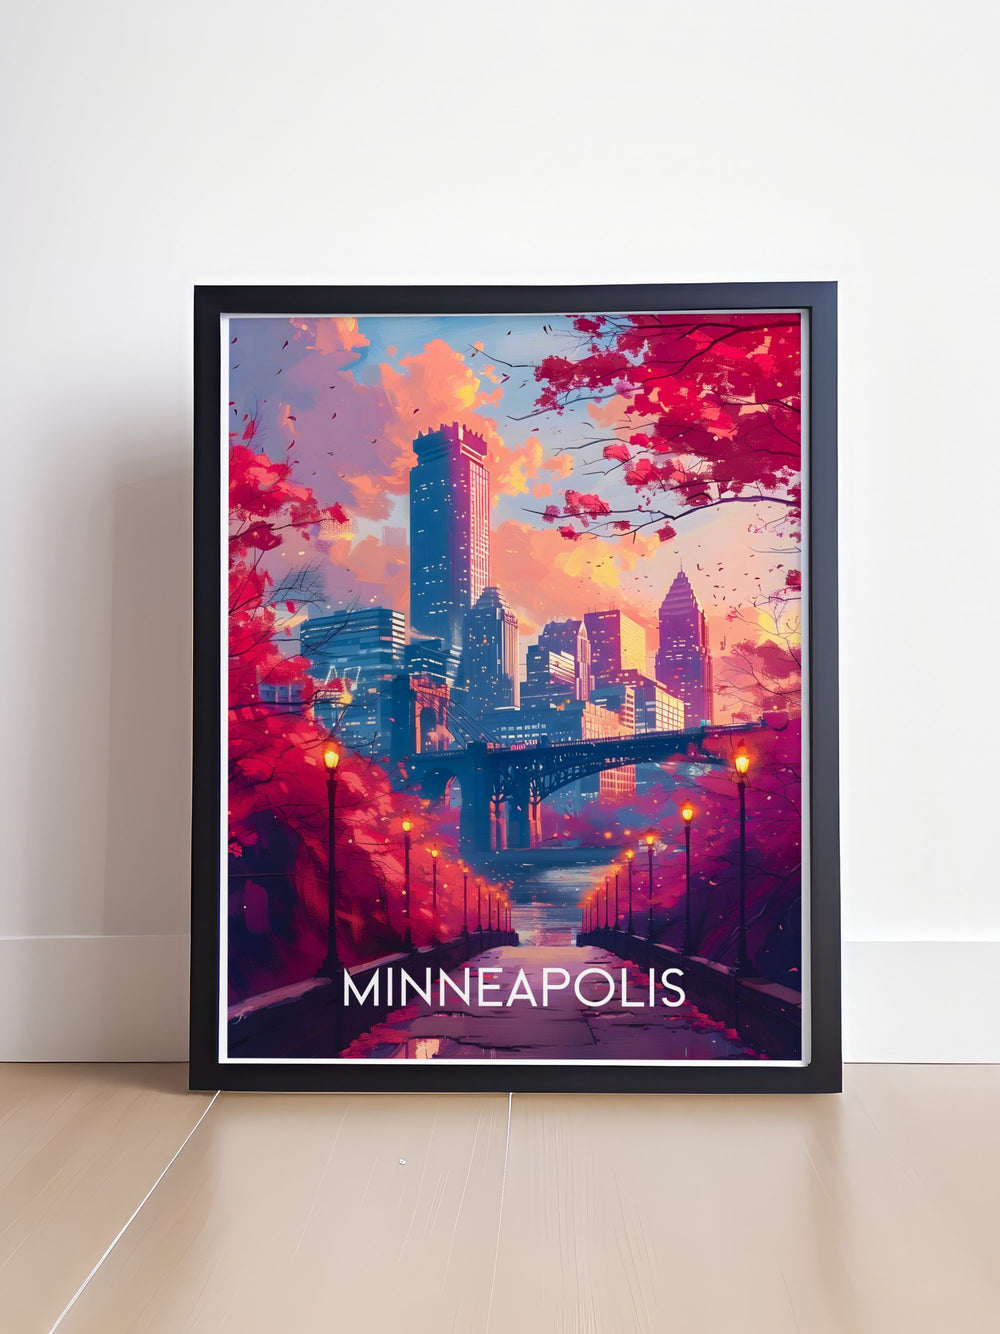 This detailed poster of the Minneapolis Skyline illustrates the citys striking skyscrapers and unique structures, making it an excellent addition to any art collection celebrating urban elegance.